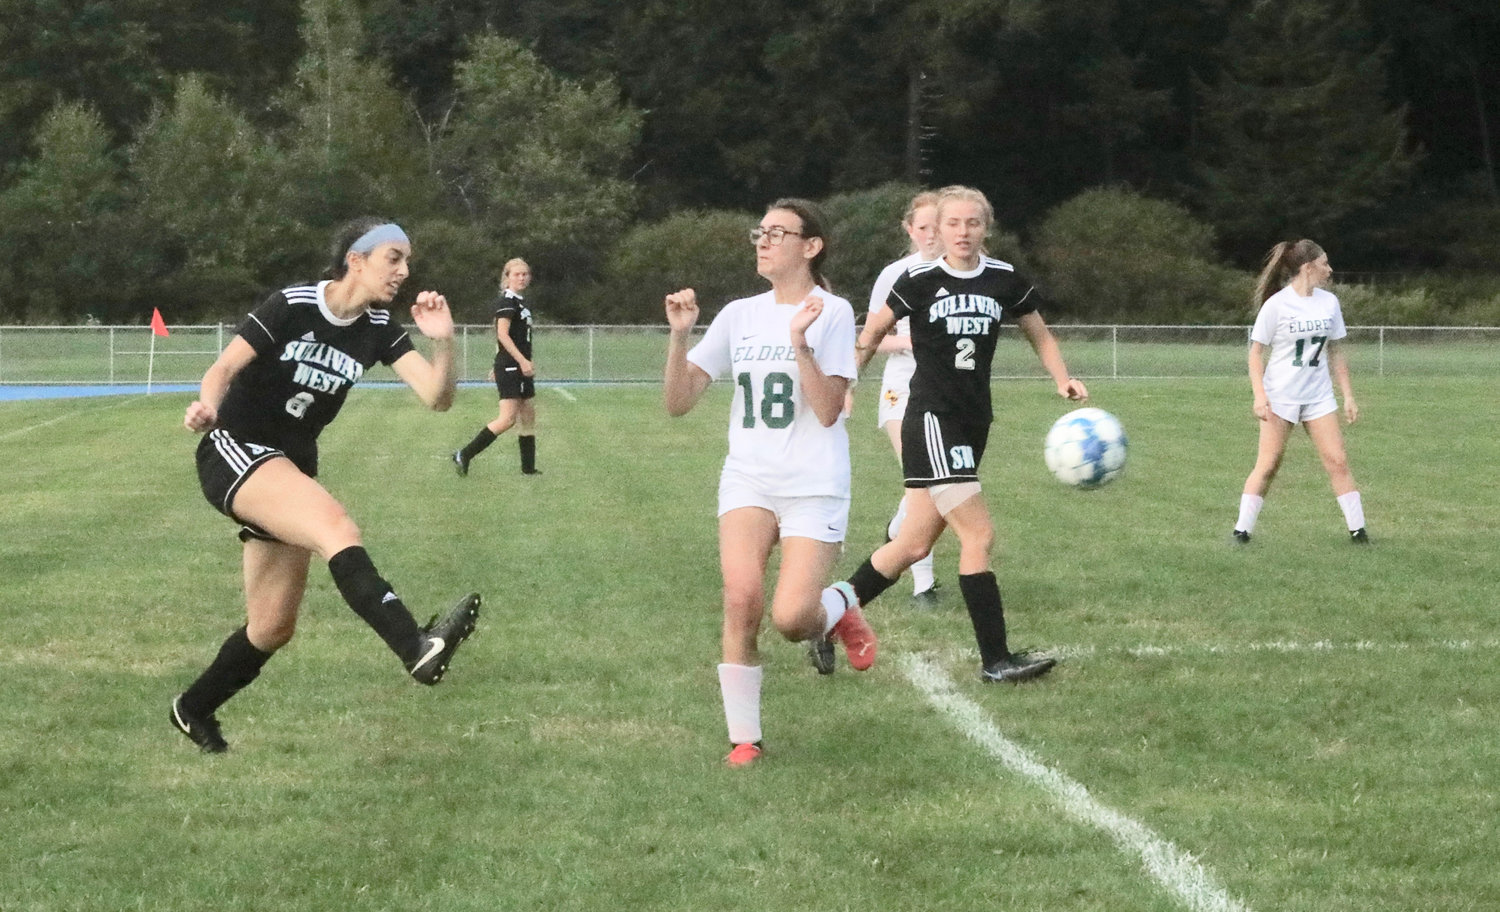 Sullivan West junior Viola Shami sends the ball past defender Rayanna Quintona. Shami recorded the hat trick with a trio of goals in the 8-0 shutout of young Eldred.